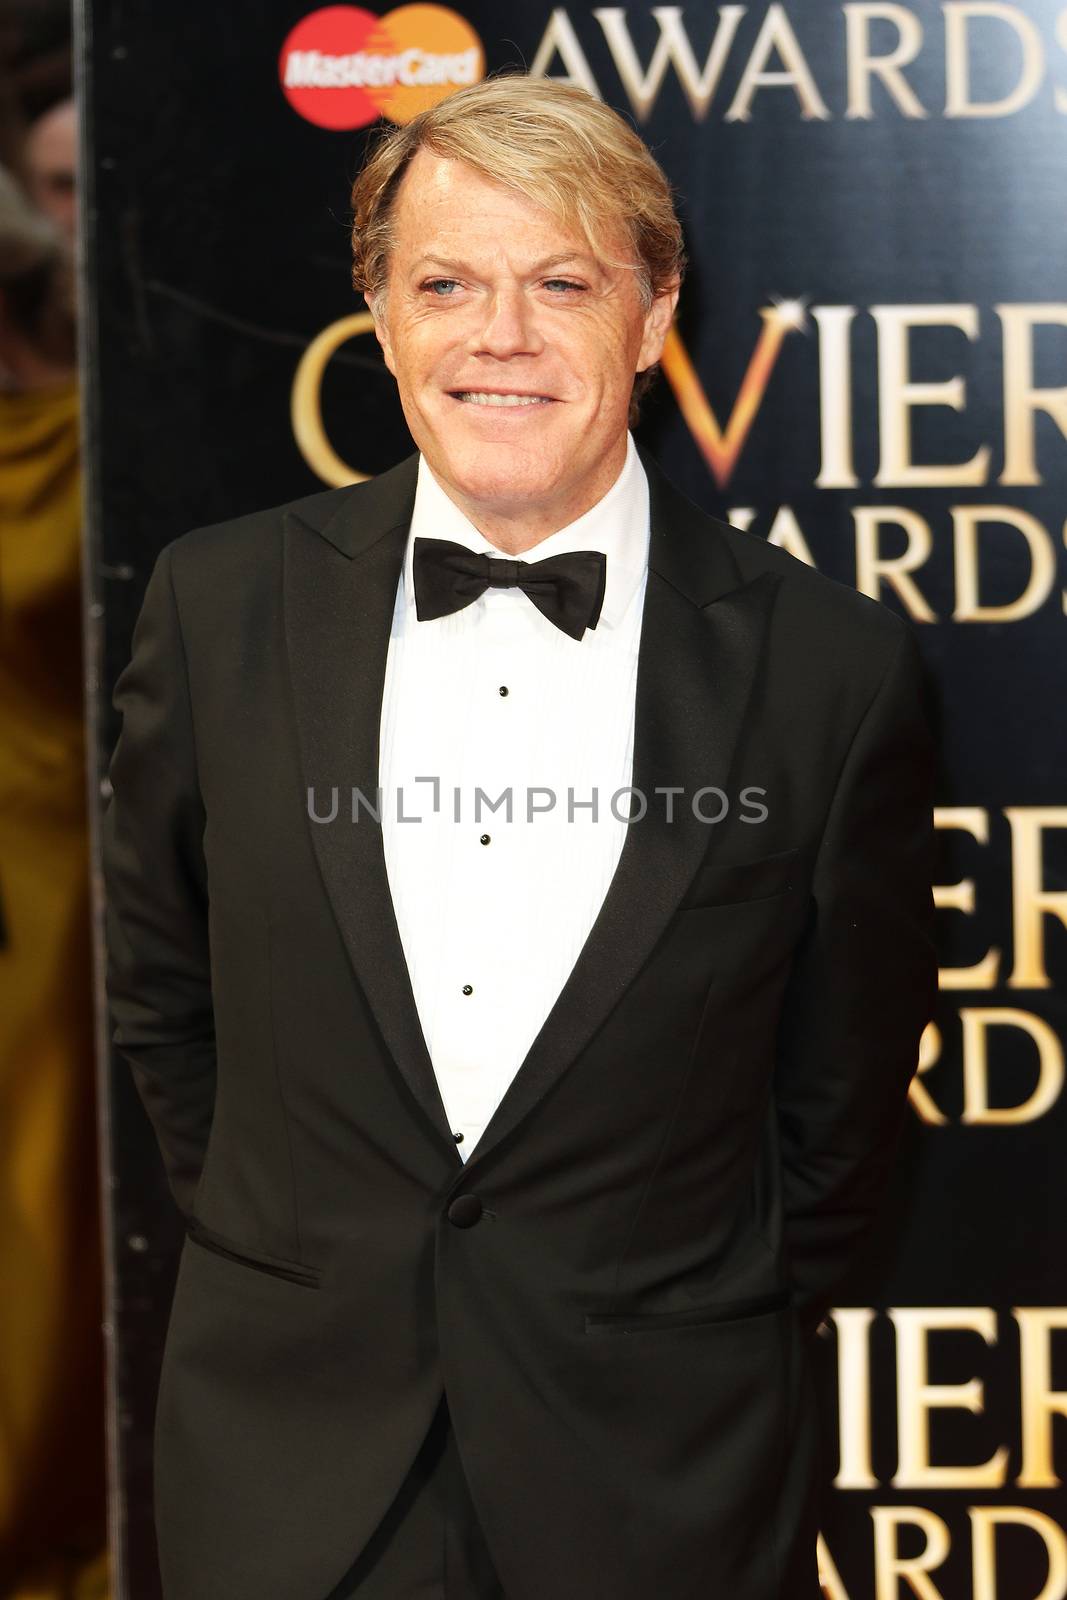 UK, London: Eddie Izzard hits the red carpet for the Olivier Awards at the Royal Opera House in London on April 3, 2016.